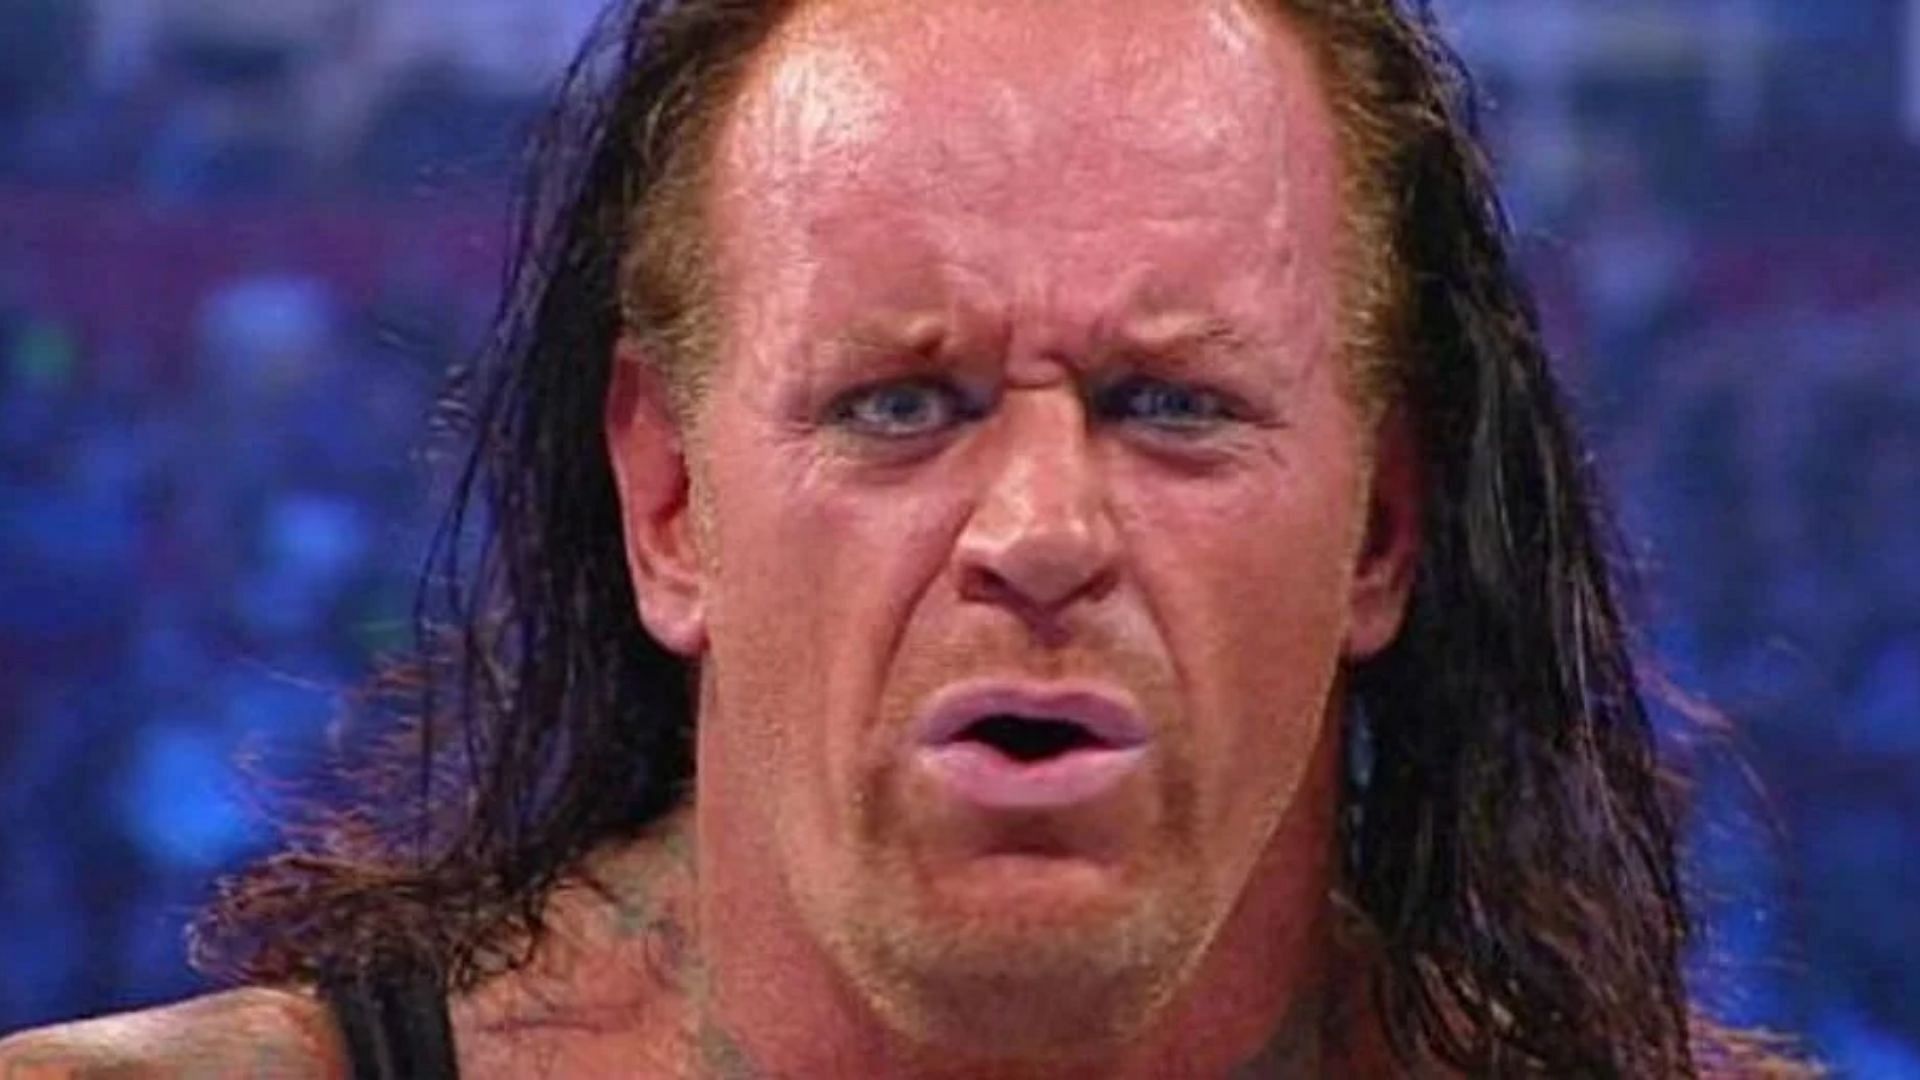 The Undertaker has achieved a lot in his wrestling career